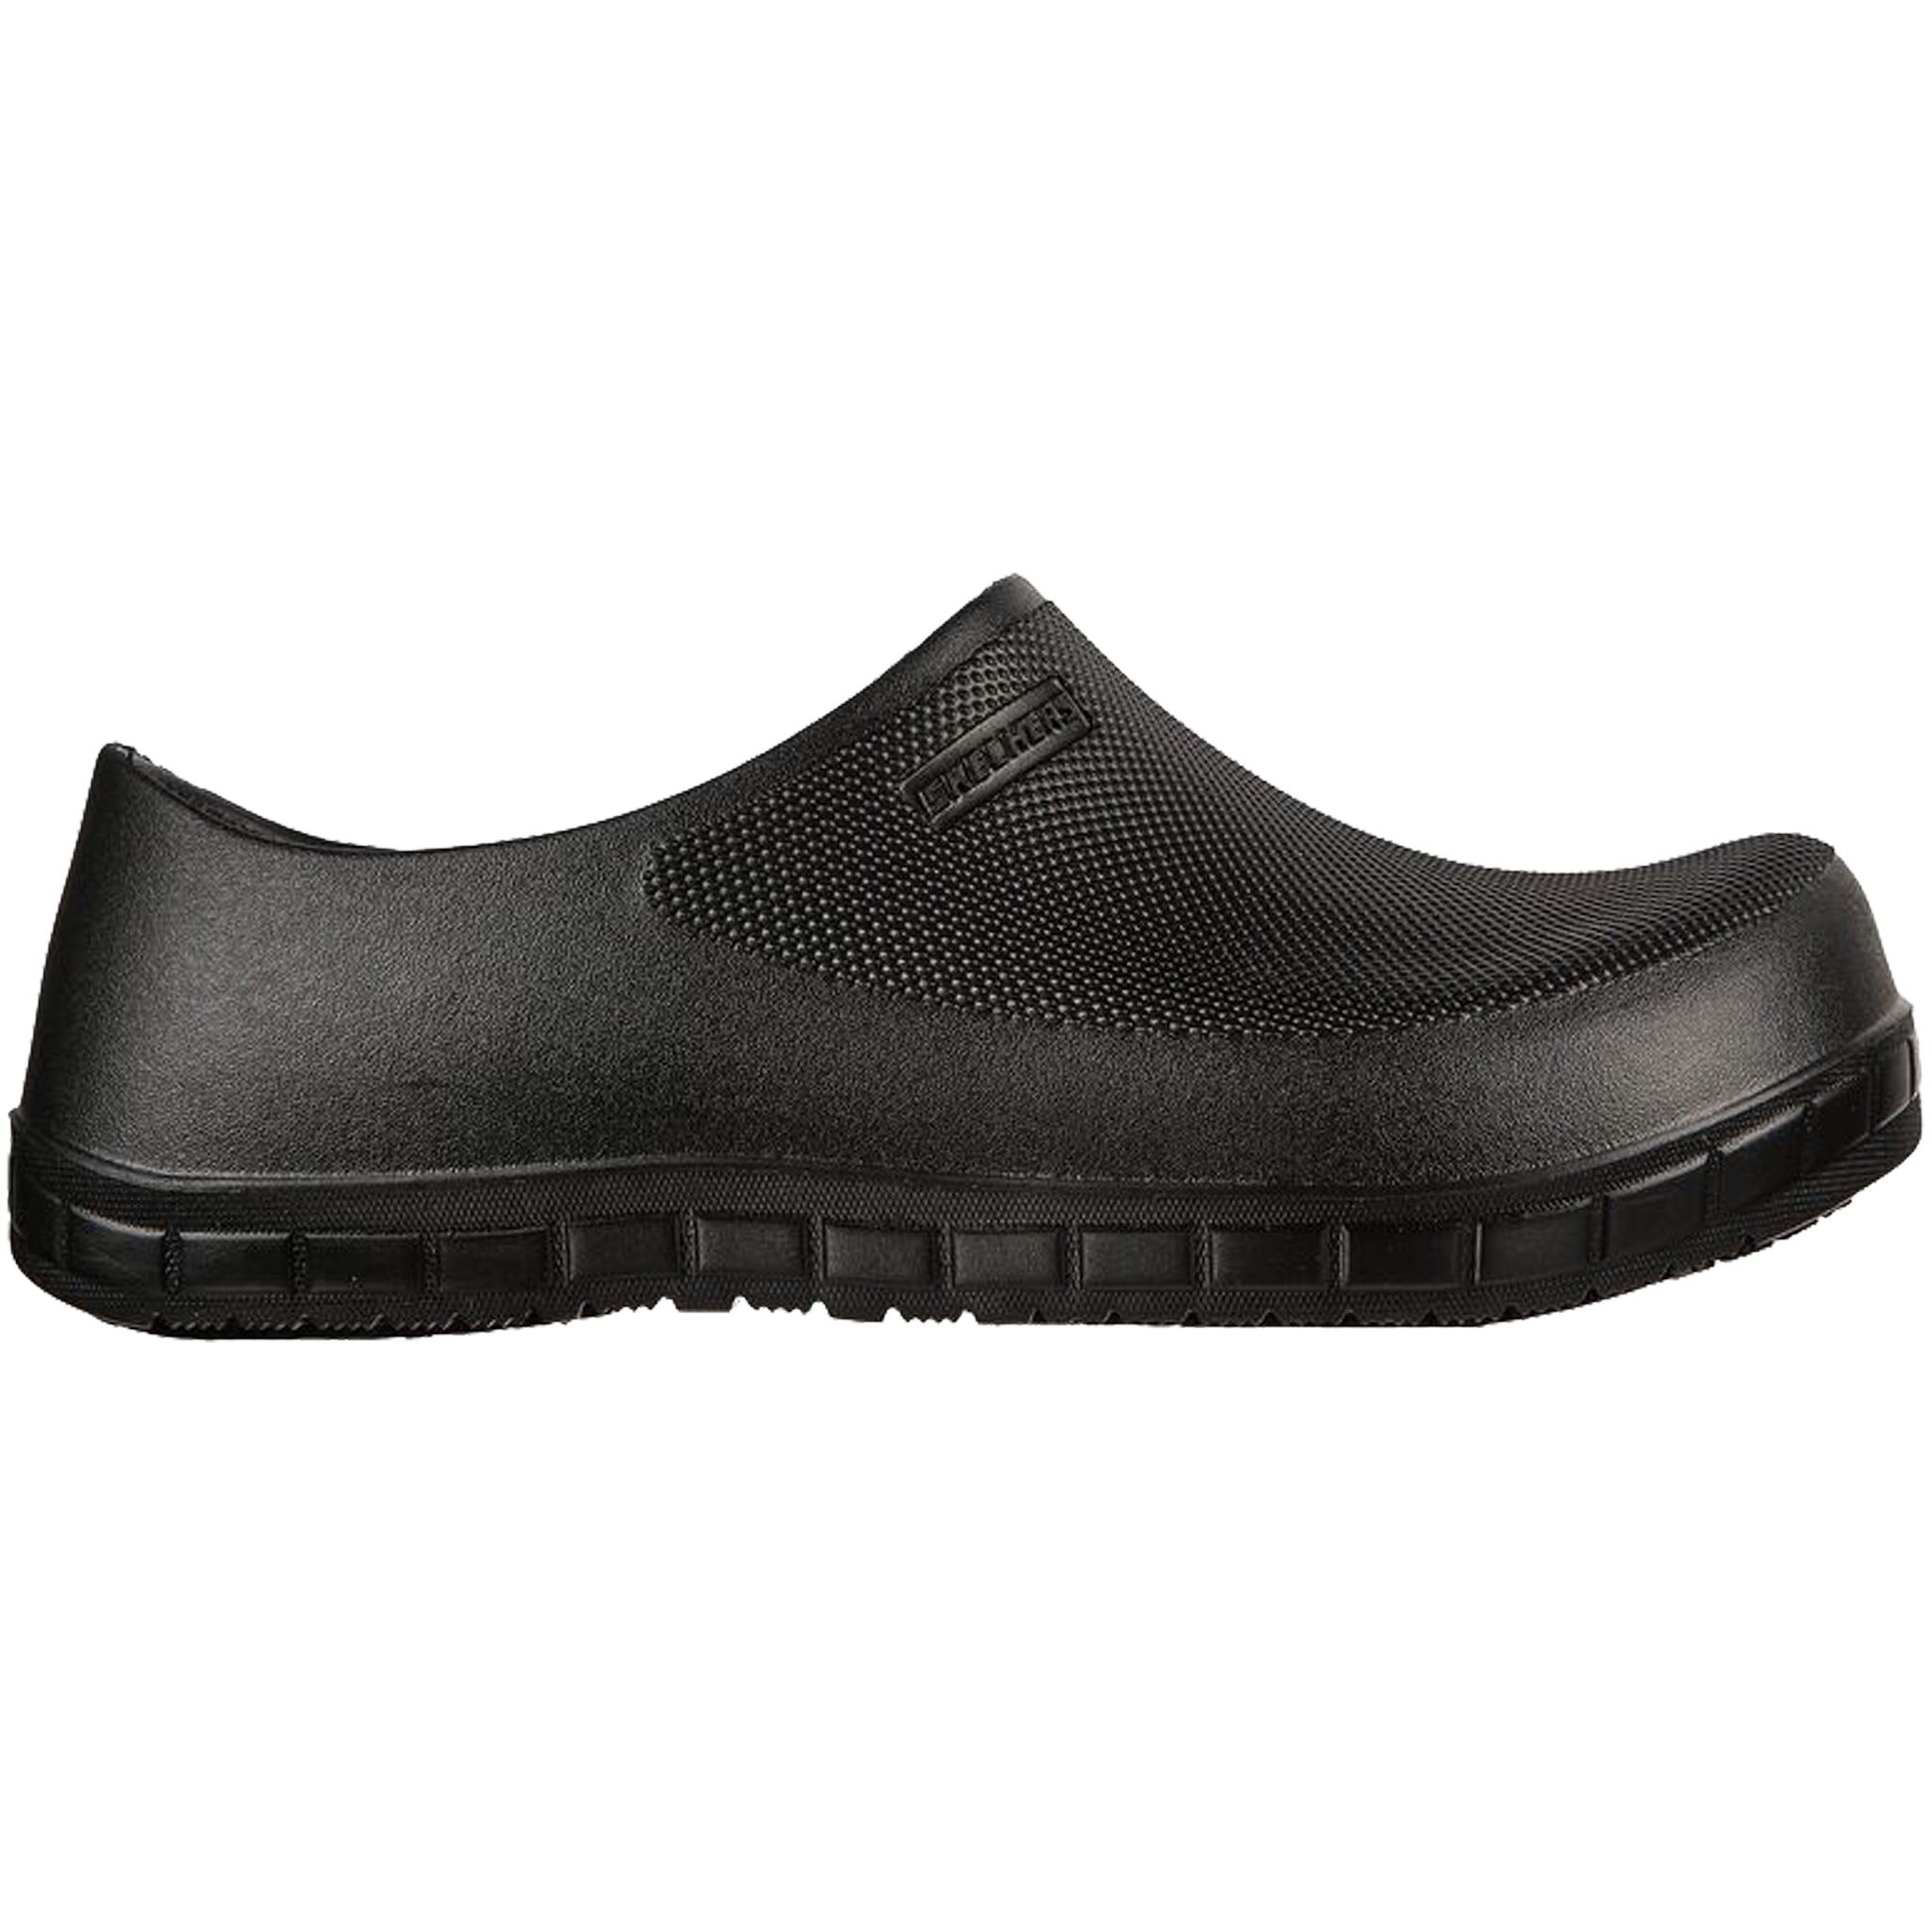 Skechers Women's 108048 Work Evaa SR Slip Resistant Slip On Work Shoes –  That Shoe Store and More